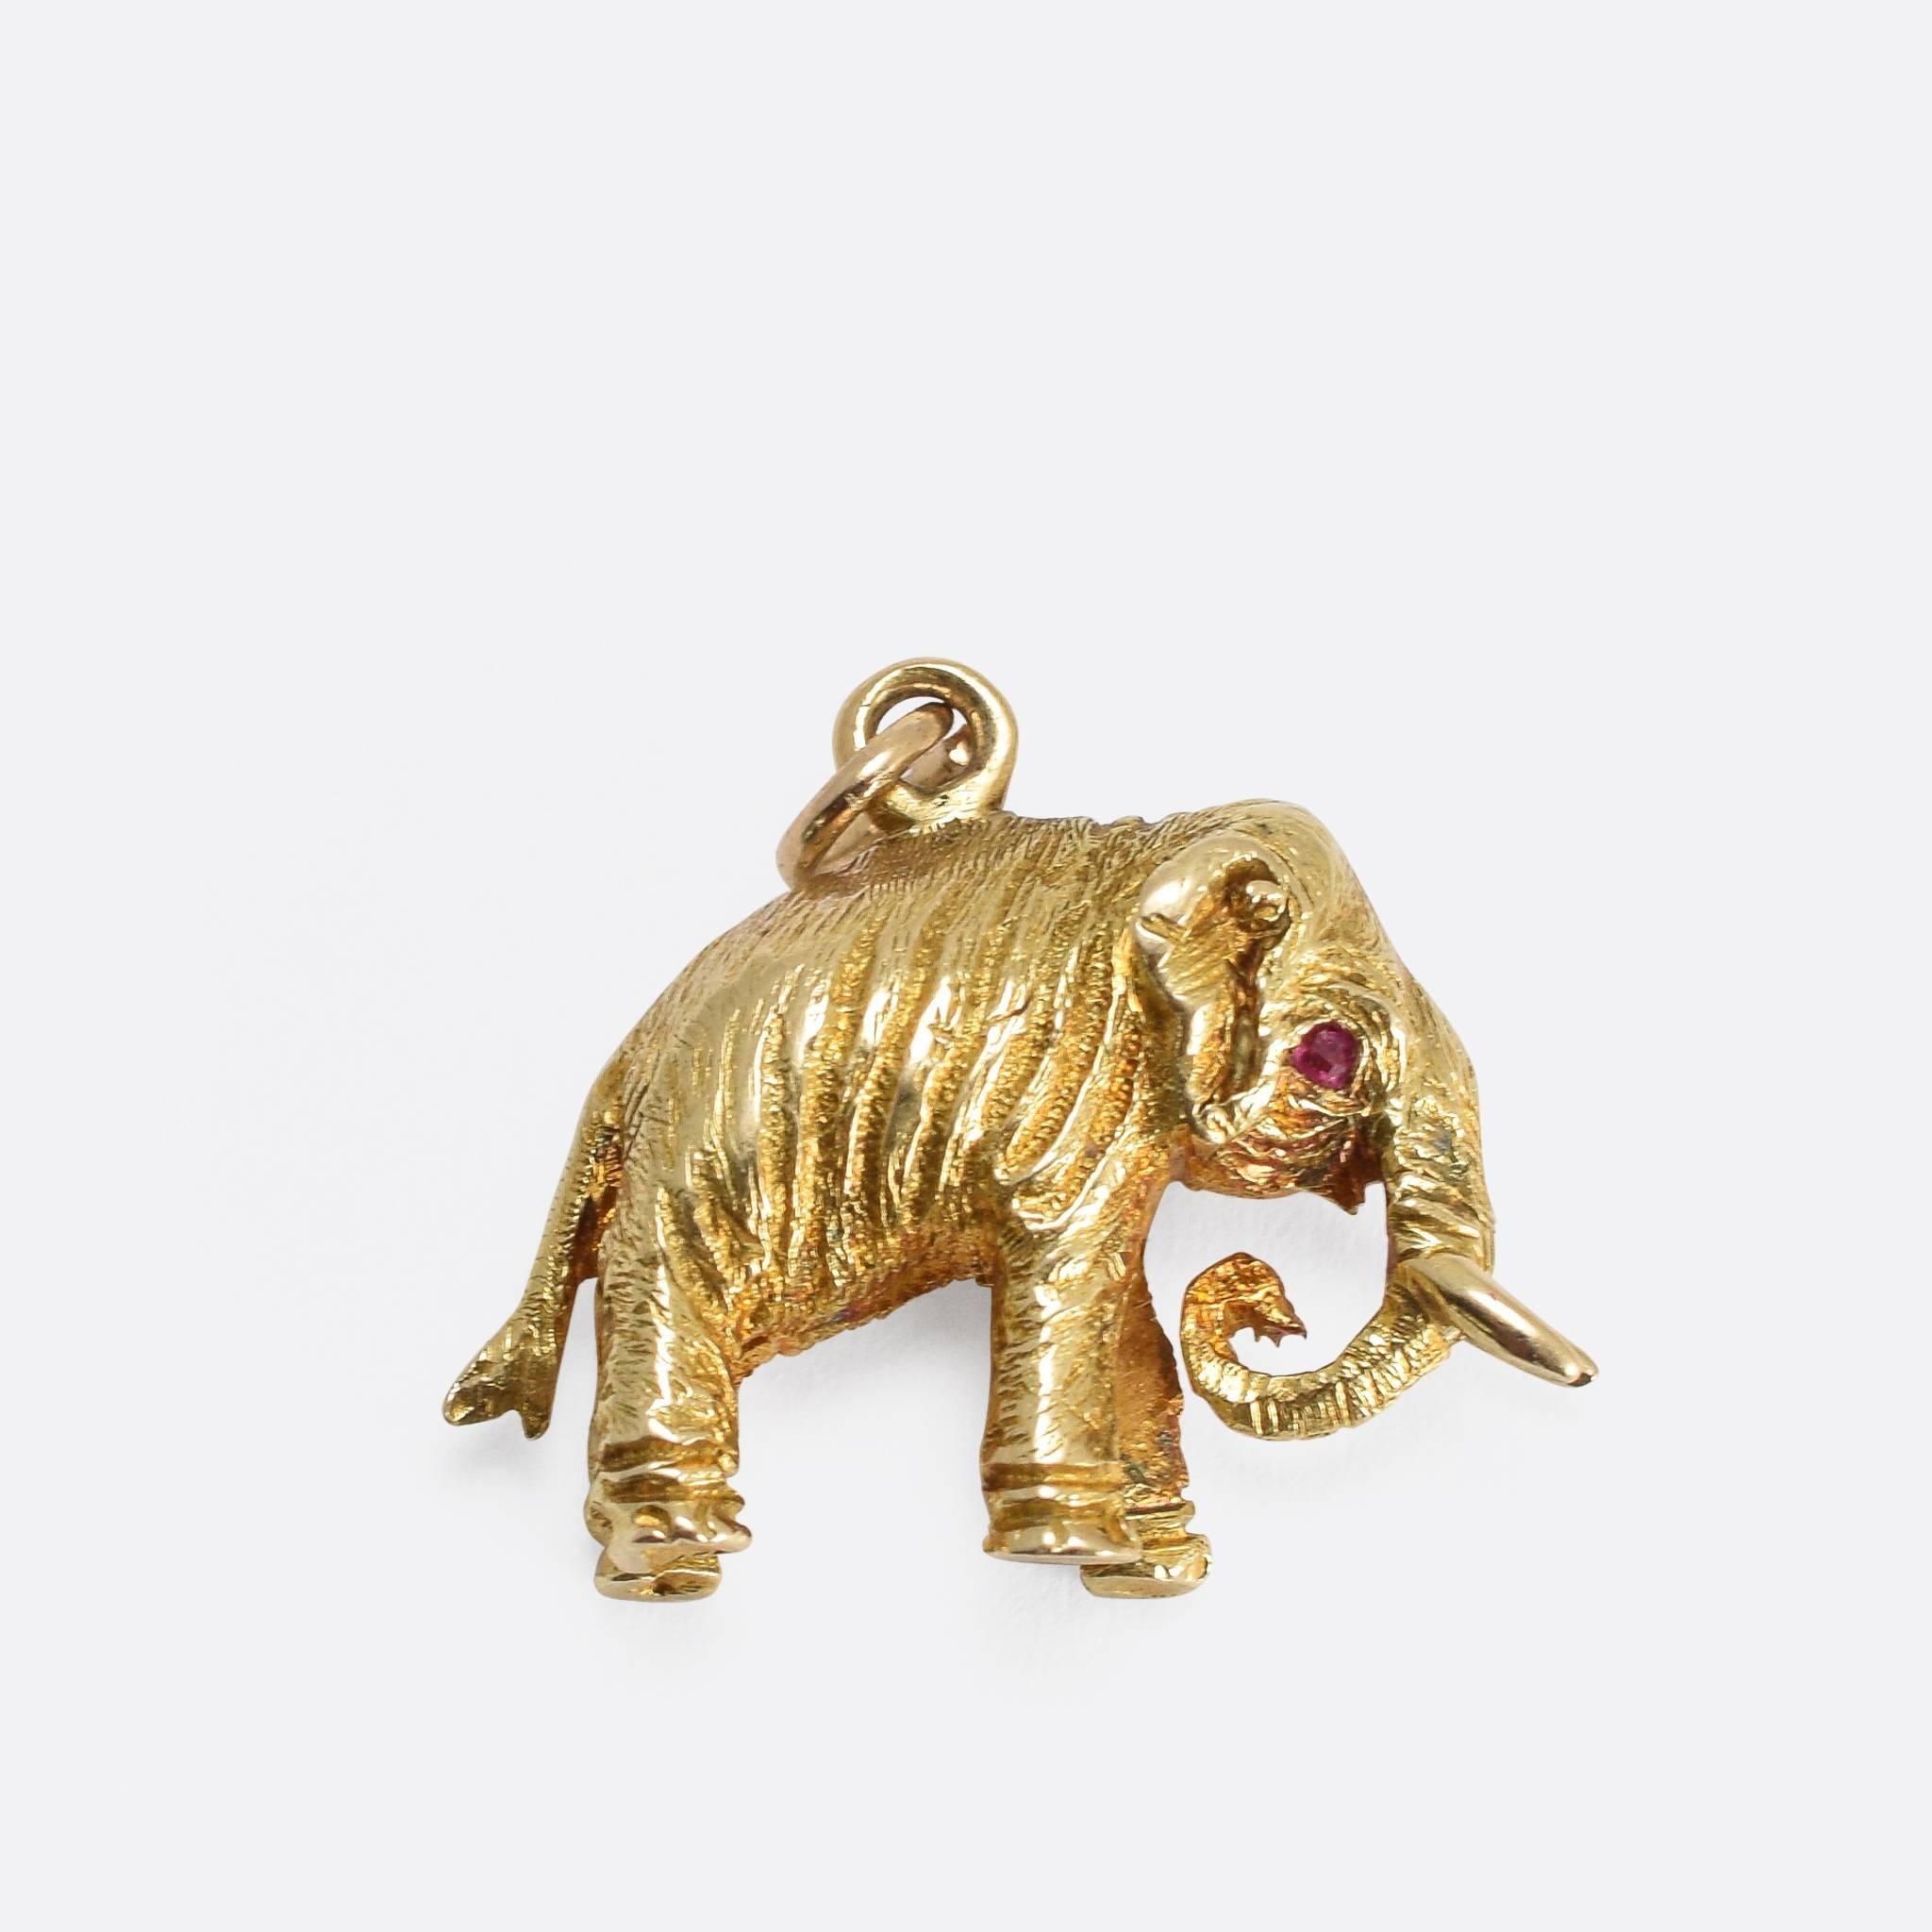 The mighty elephant, beautifully modelled in 15k yellow gold with rubies for eyes. It dates to c.1900 and has a great look - fully hand-chased all over with realistic skin detailing.